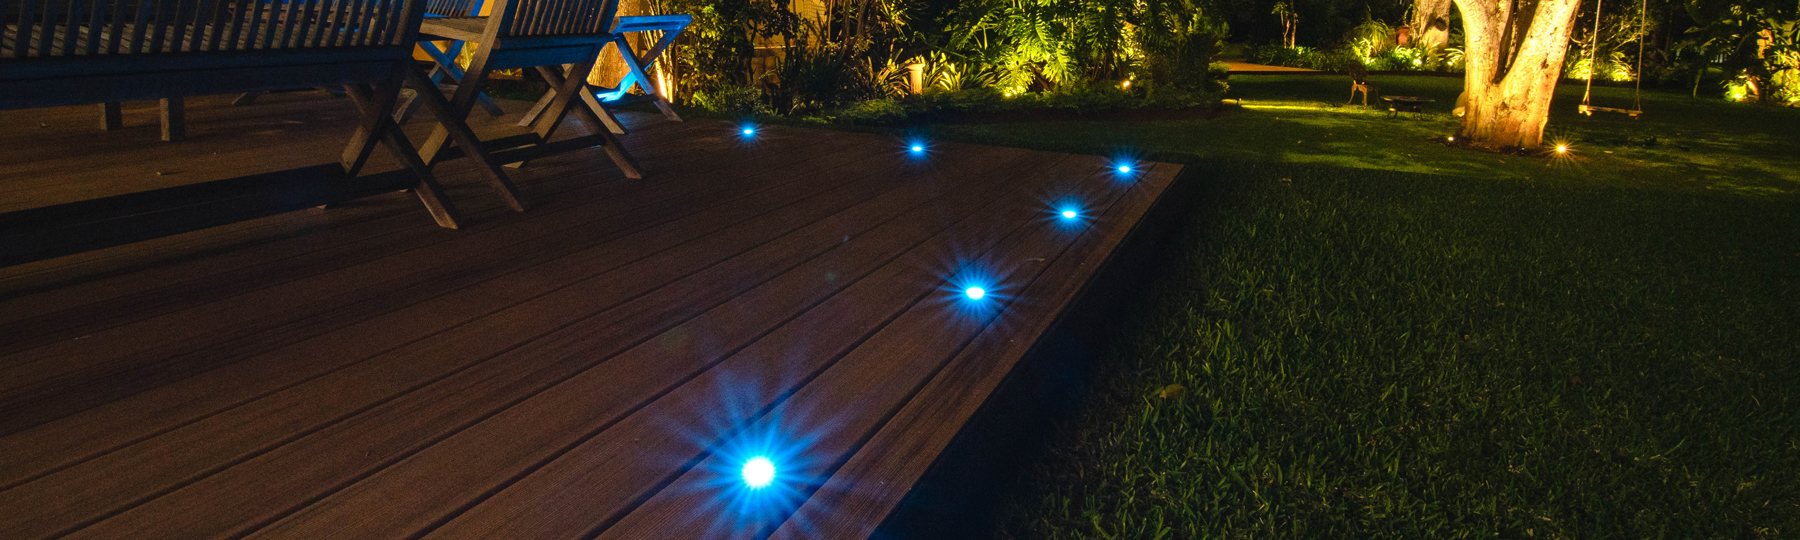 How To Install Deck Lights Yourself Holman Industries